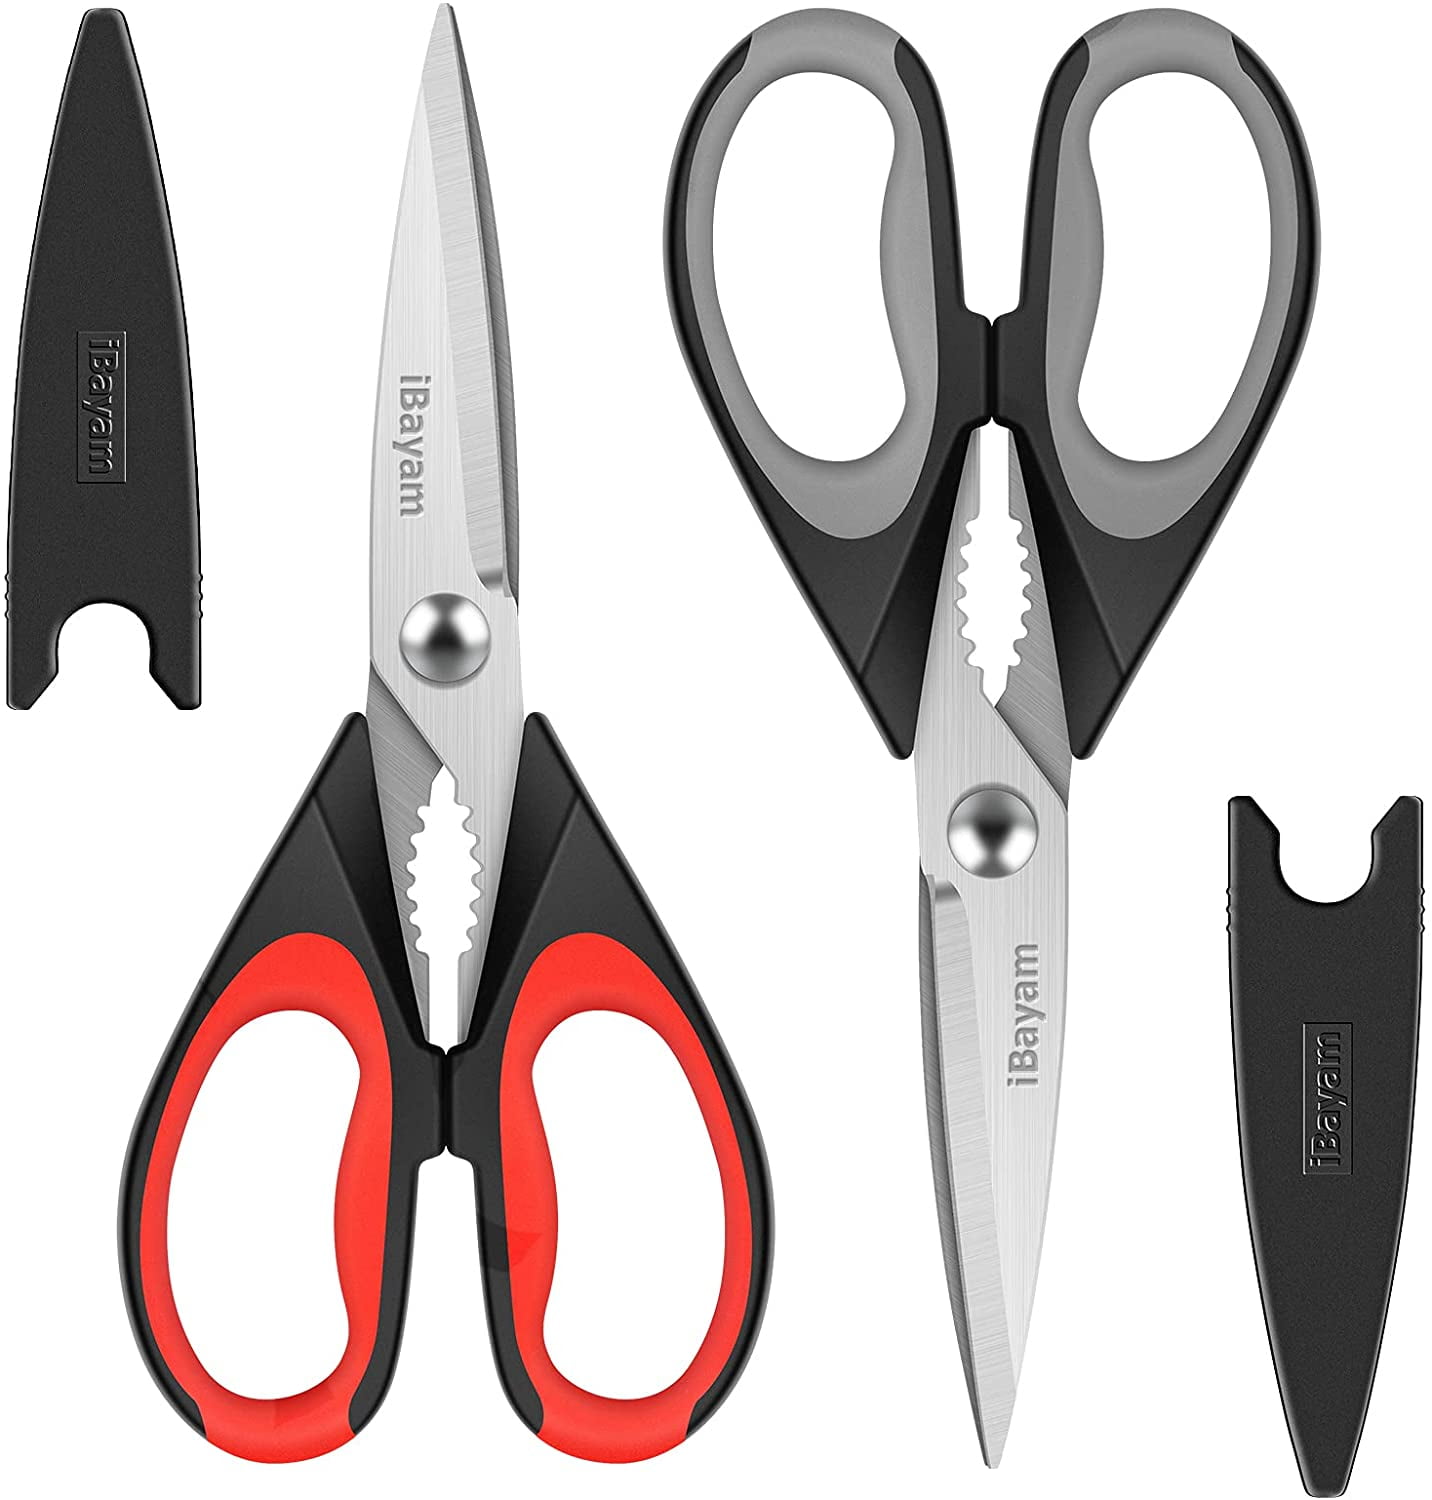 TIJERAS Heavy Duty Poultry Shears - Black Kitchen Shears with Serrated Edge  - Multipurpose Spring Loaded Cooking Scissors for Fathers Day - Stainless